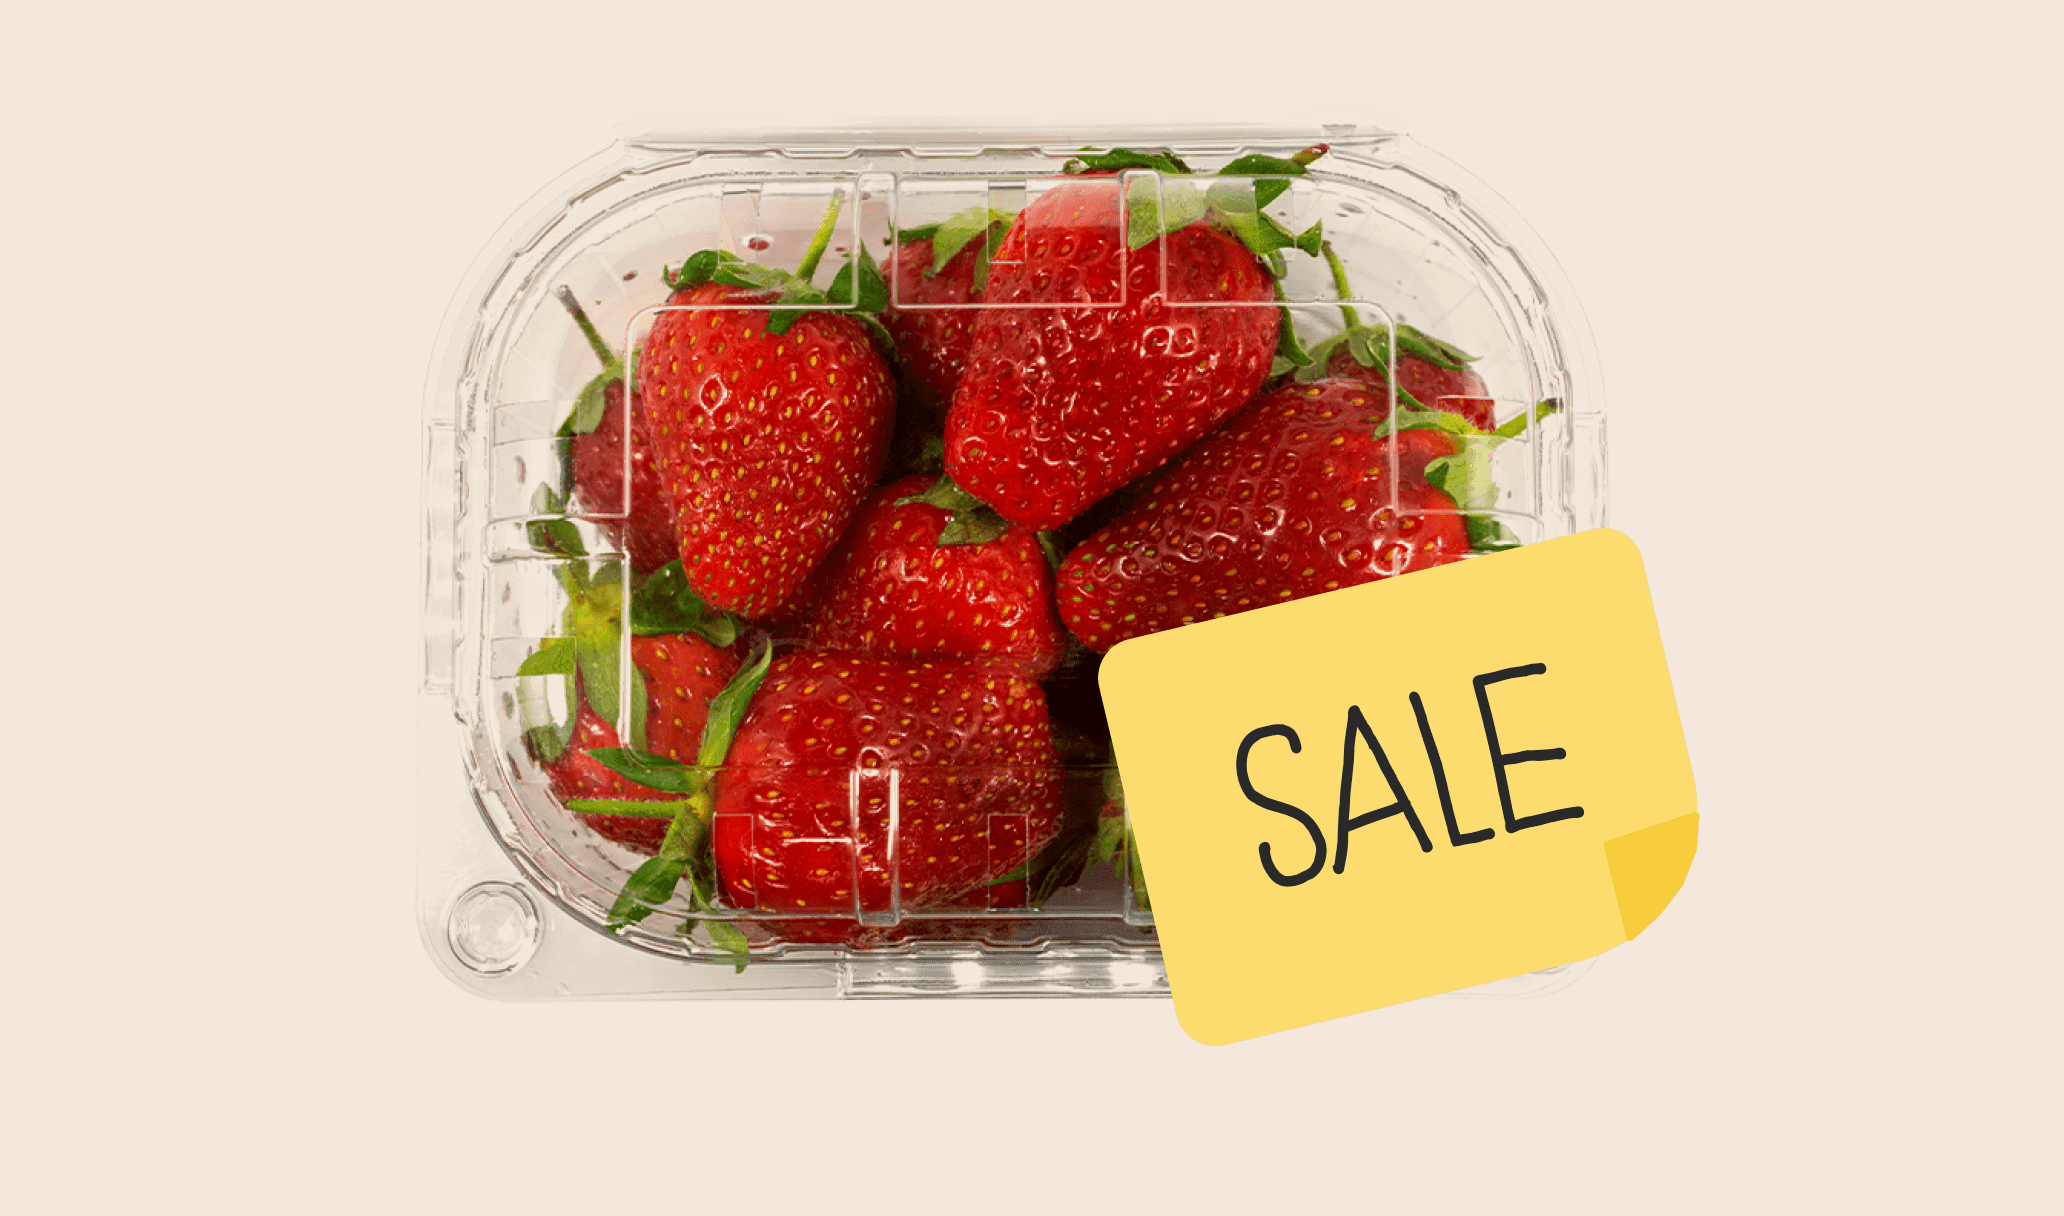 Delicious strawberry is on sale in a supermarket.